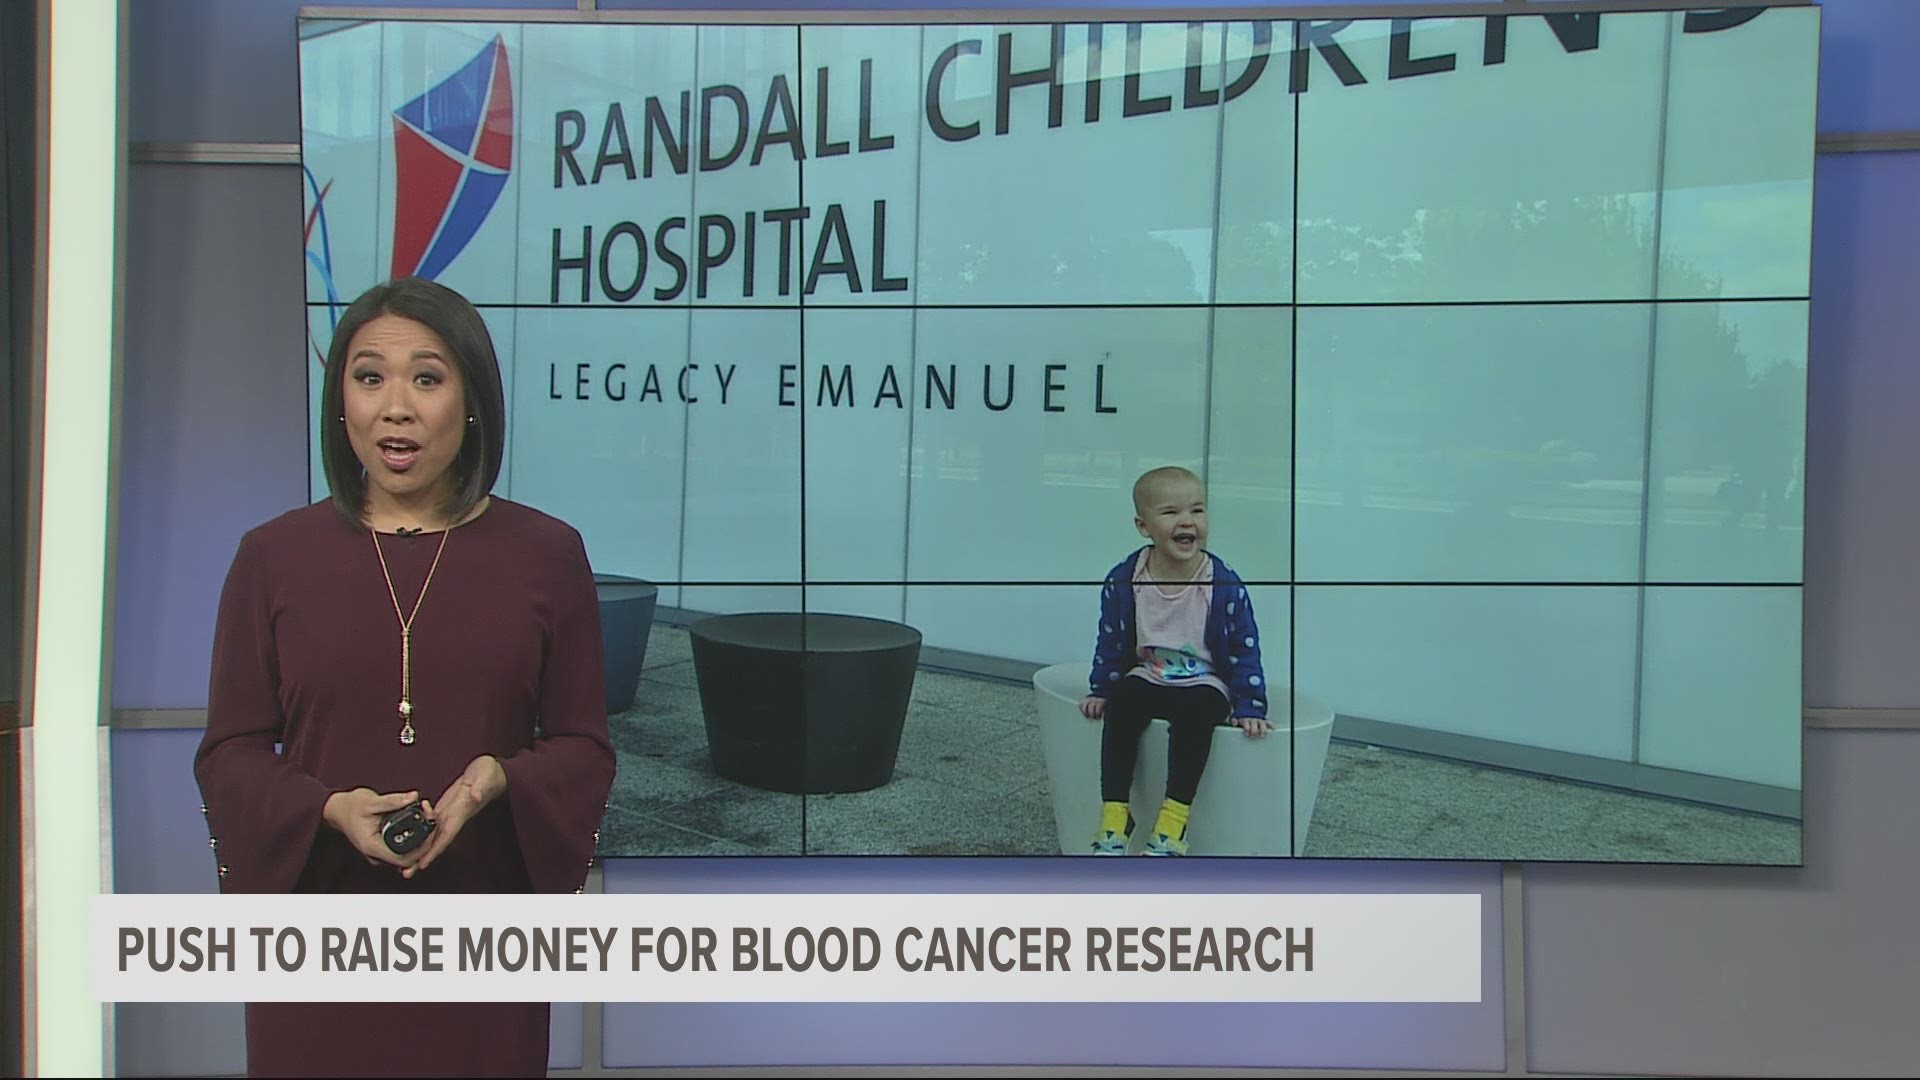 Four-year-old Sasha was diagnosed with leukemia. But she's on the road to recovery, thanks in part to the money people have donated to researching treatments.